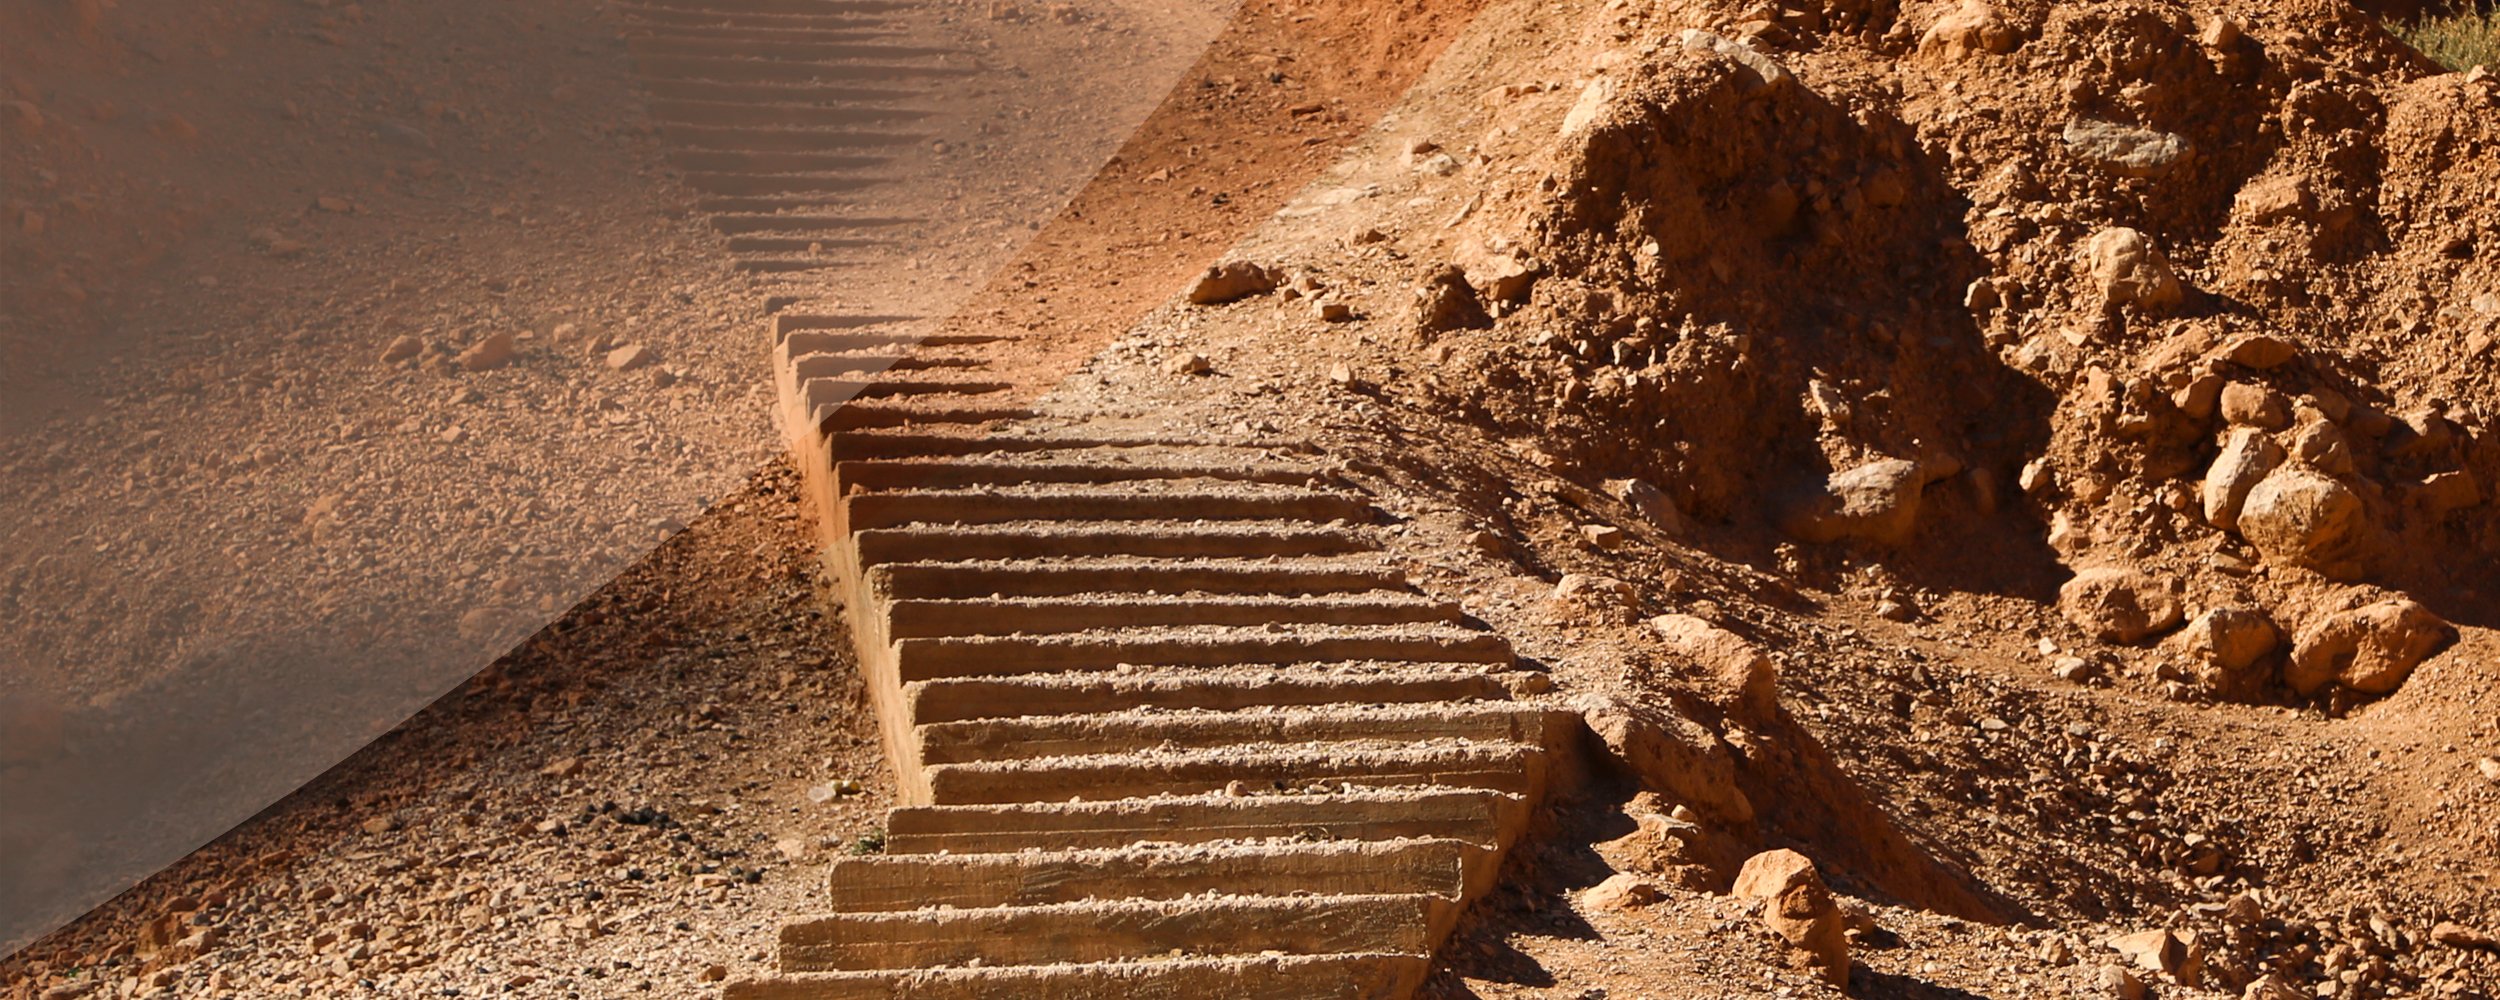 Staircase in Todra Gorge, Morocco.